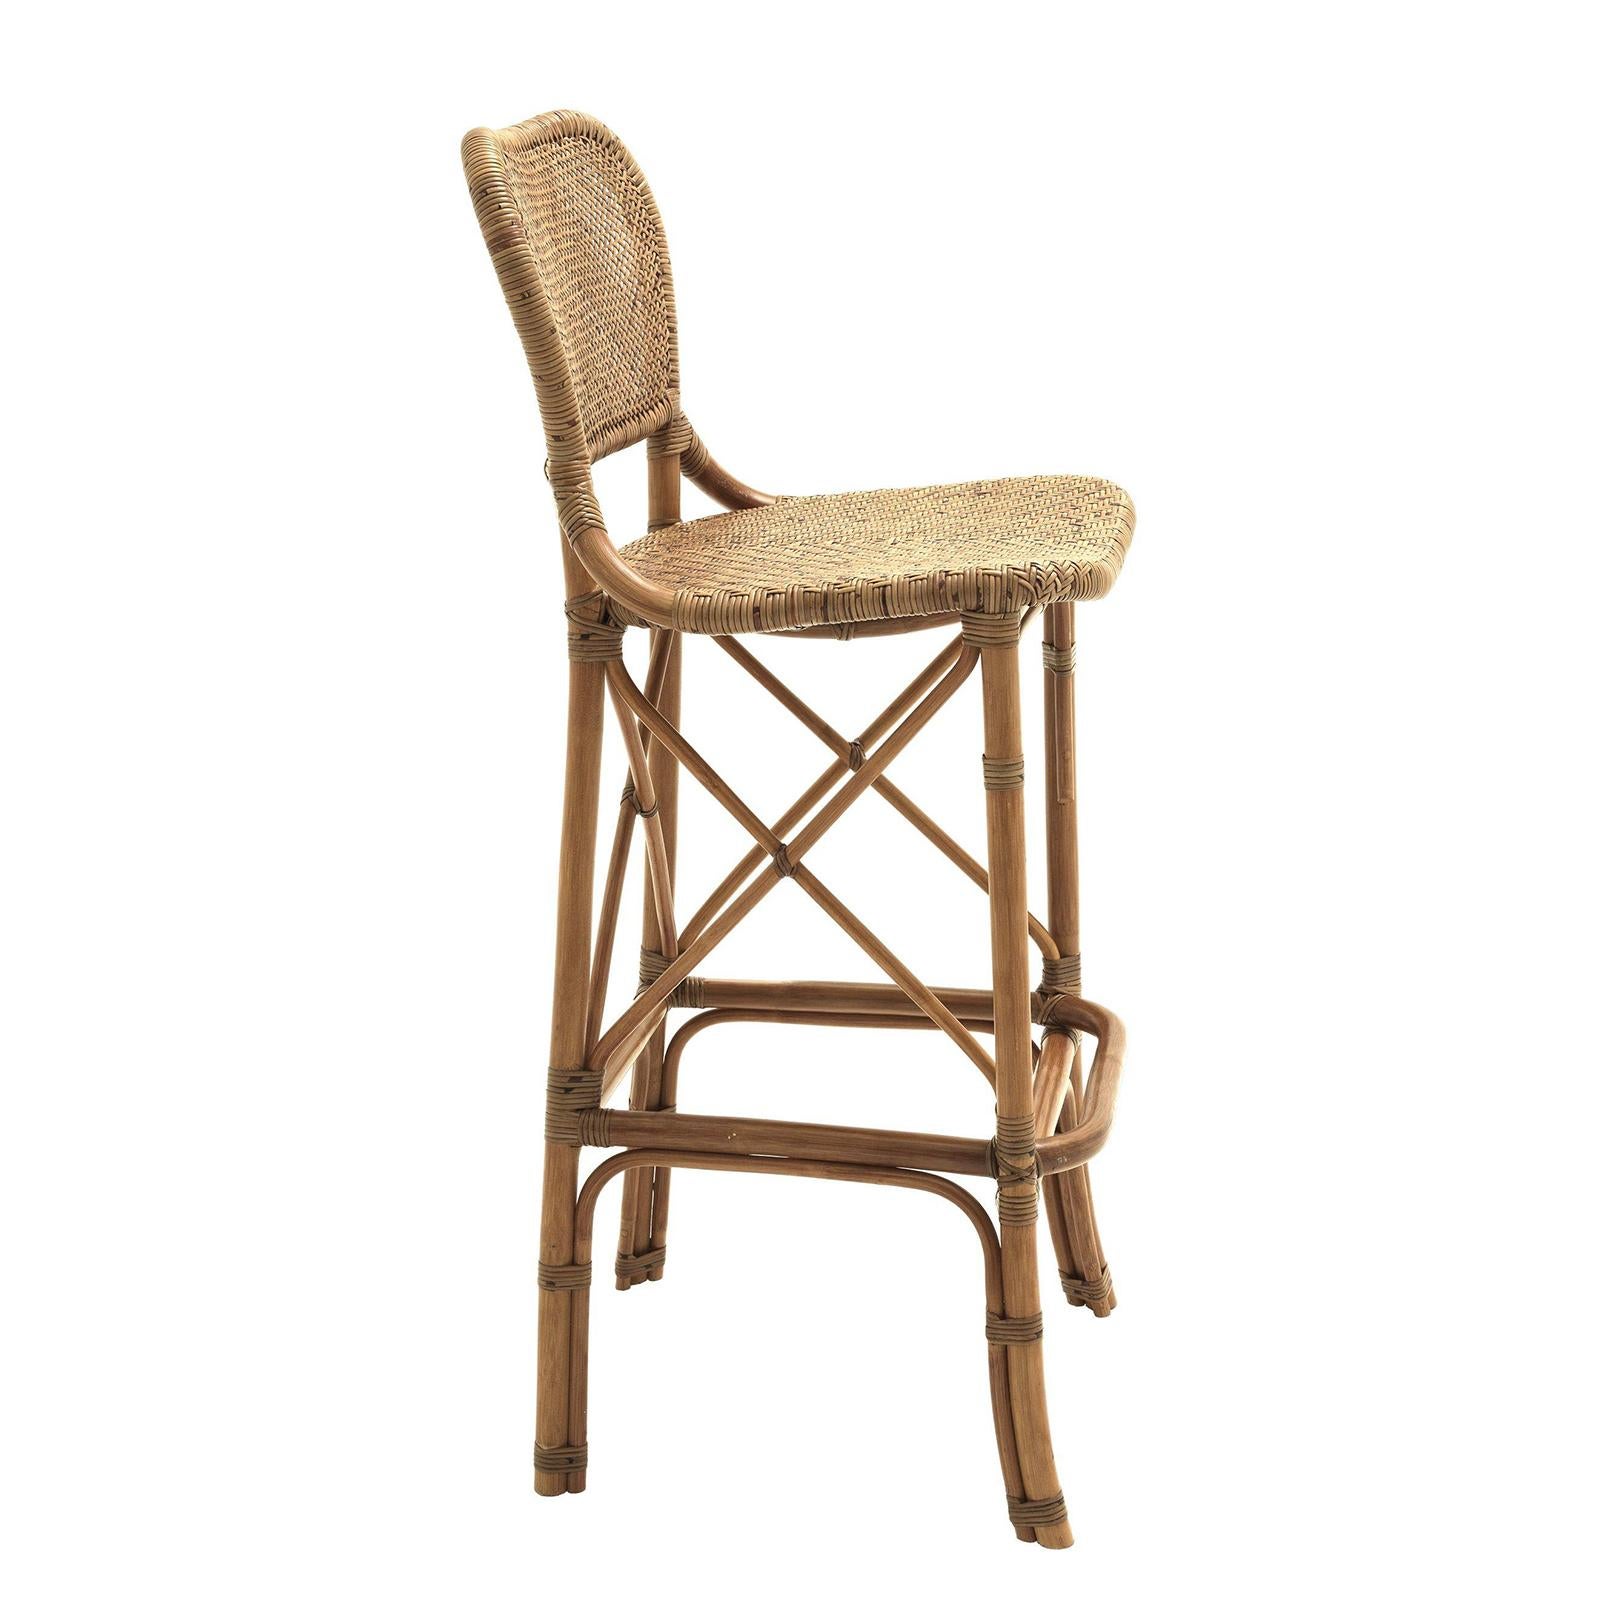 Bar stool rattan style all in
natural rattan in clear finish.